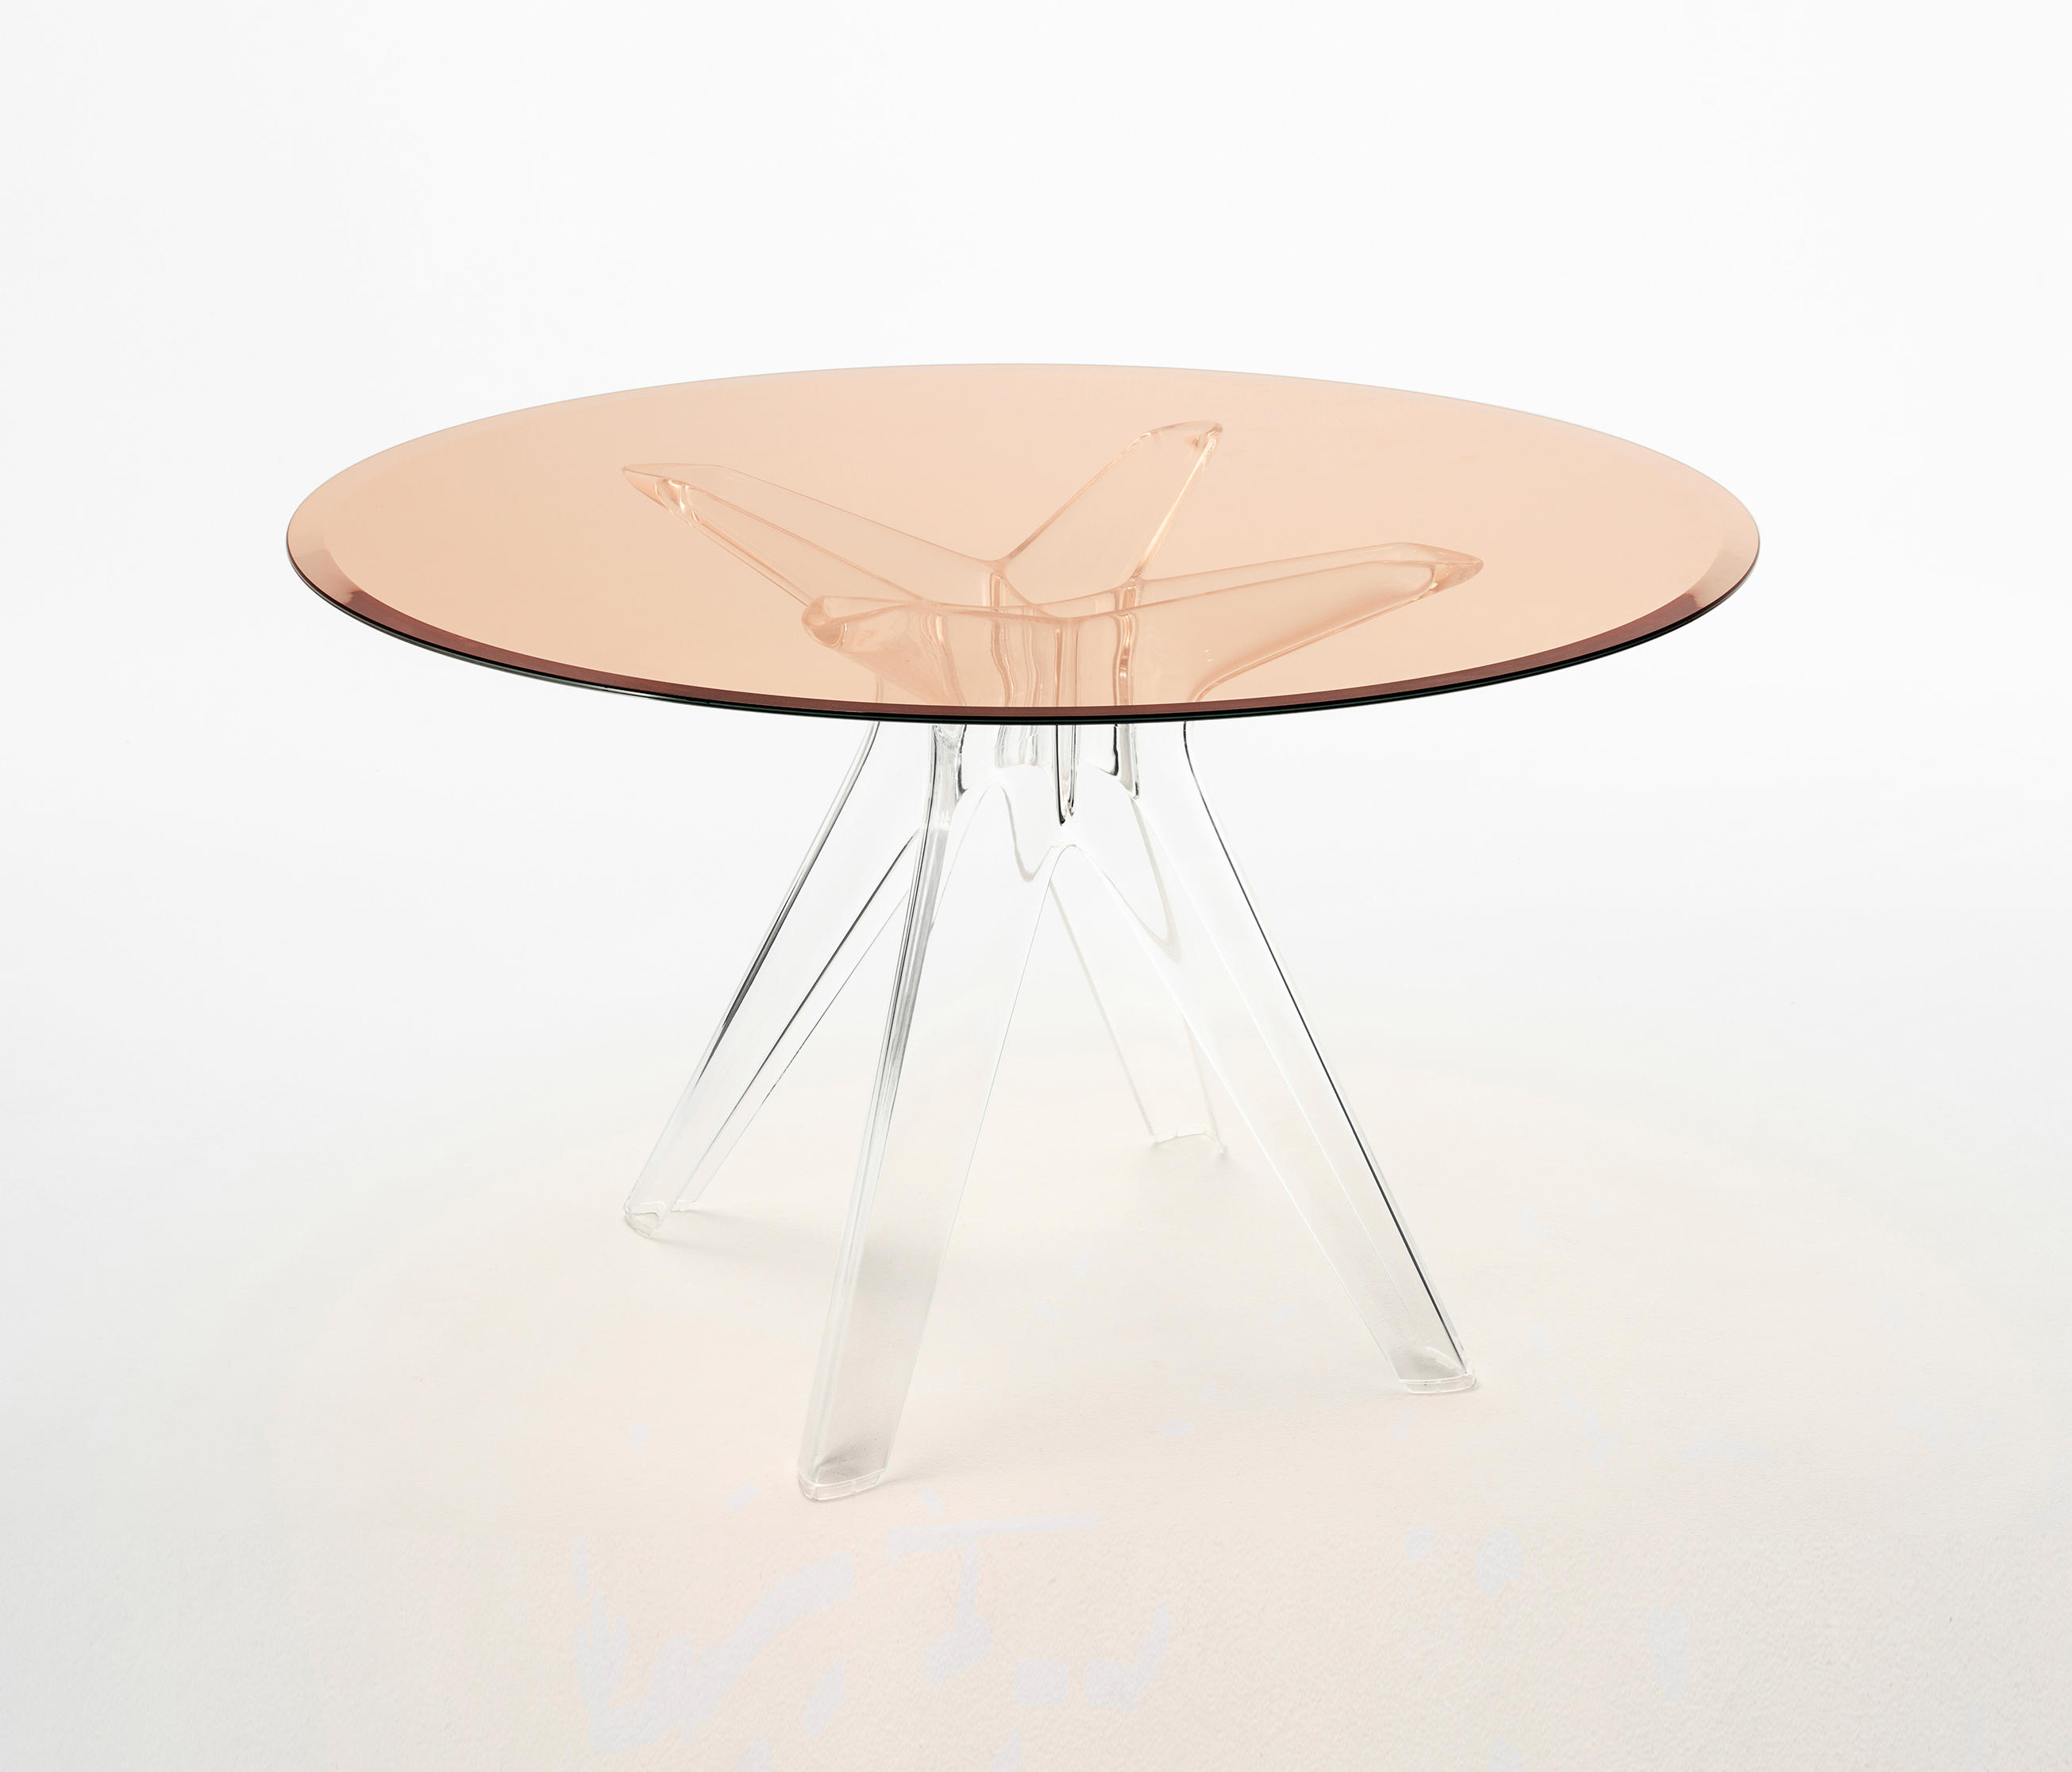 Sir Gio Table by Philippe Starck for Kartell